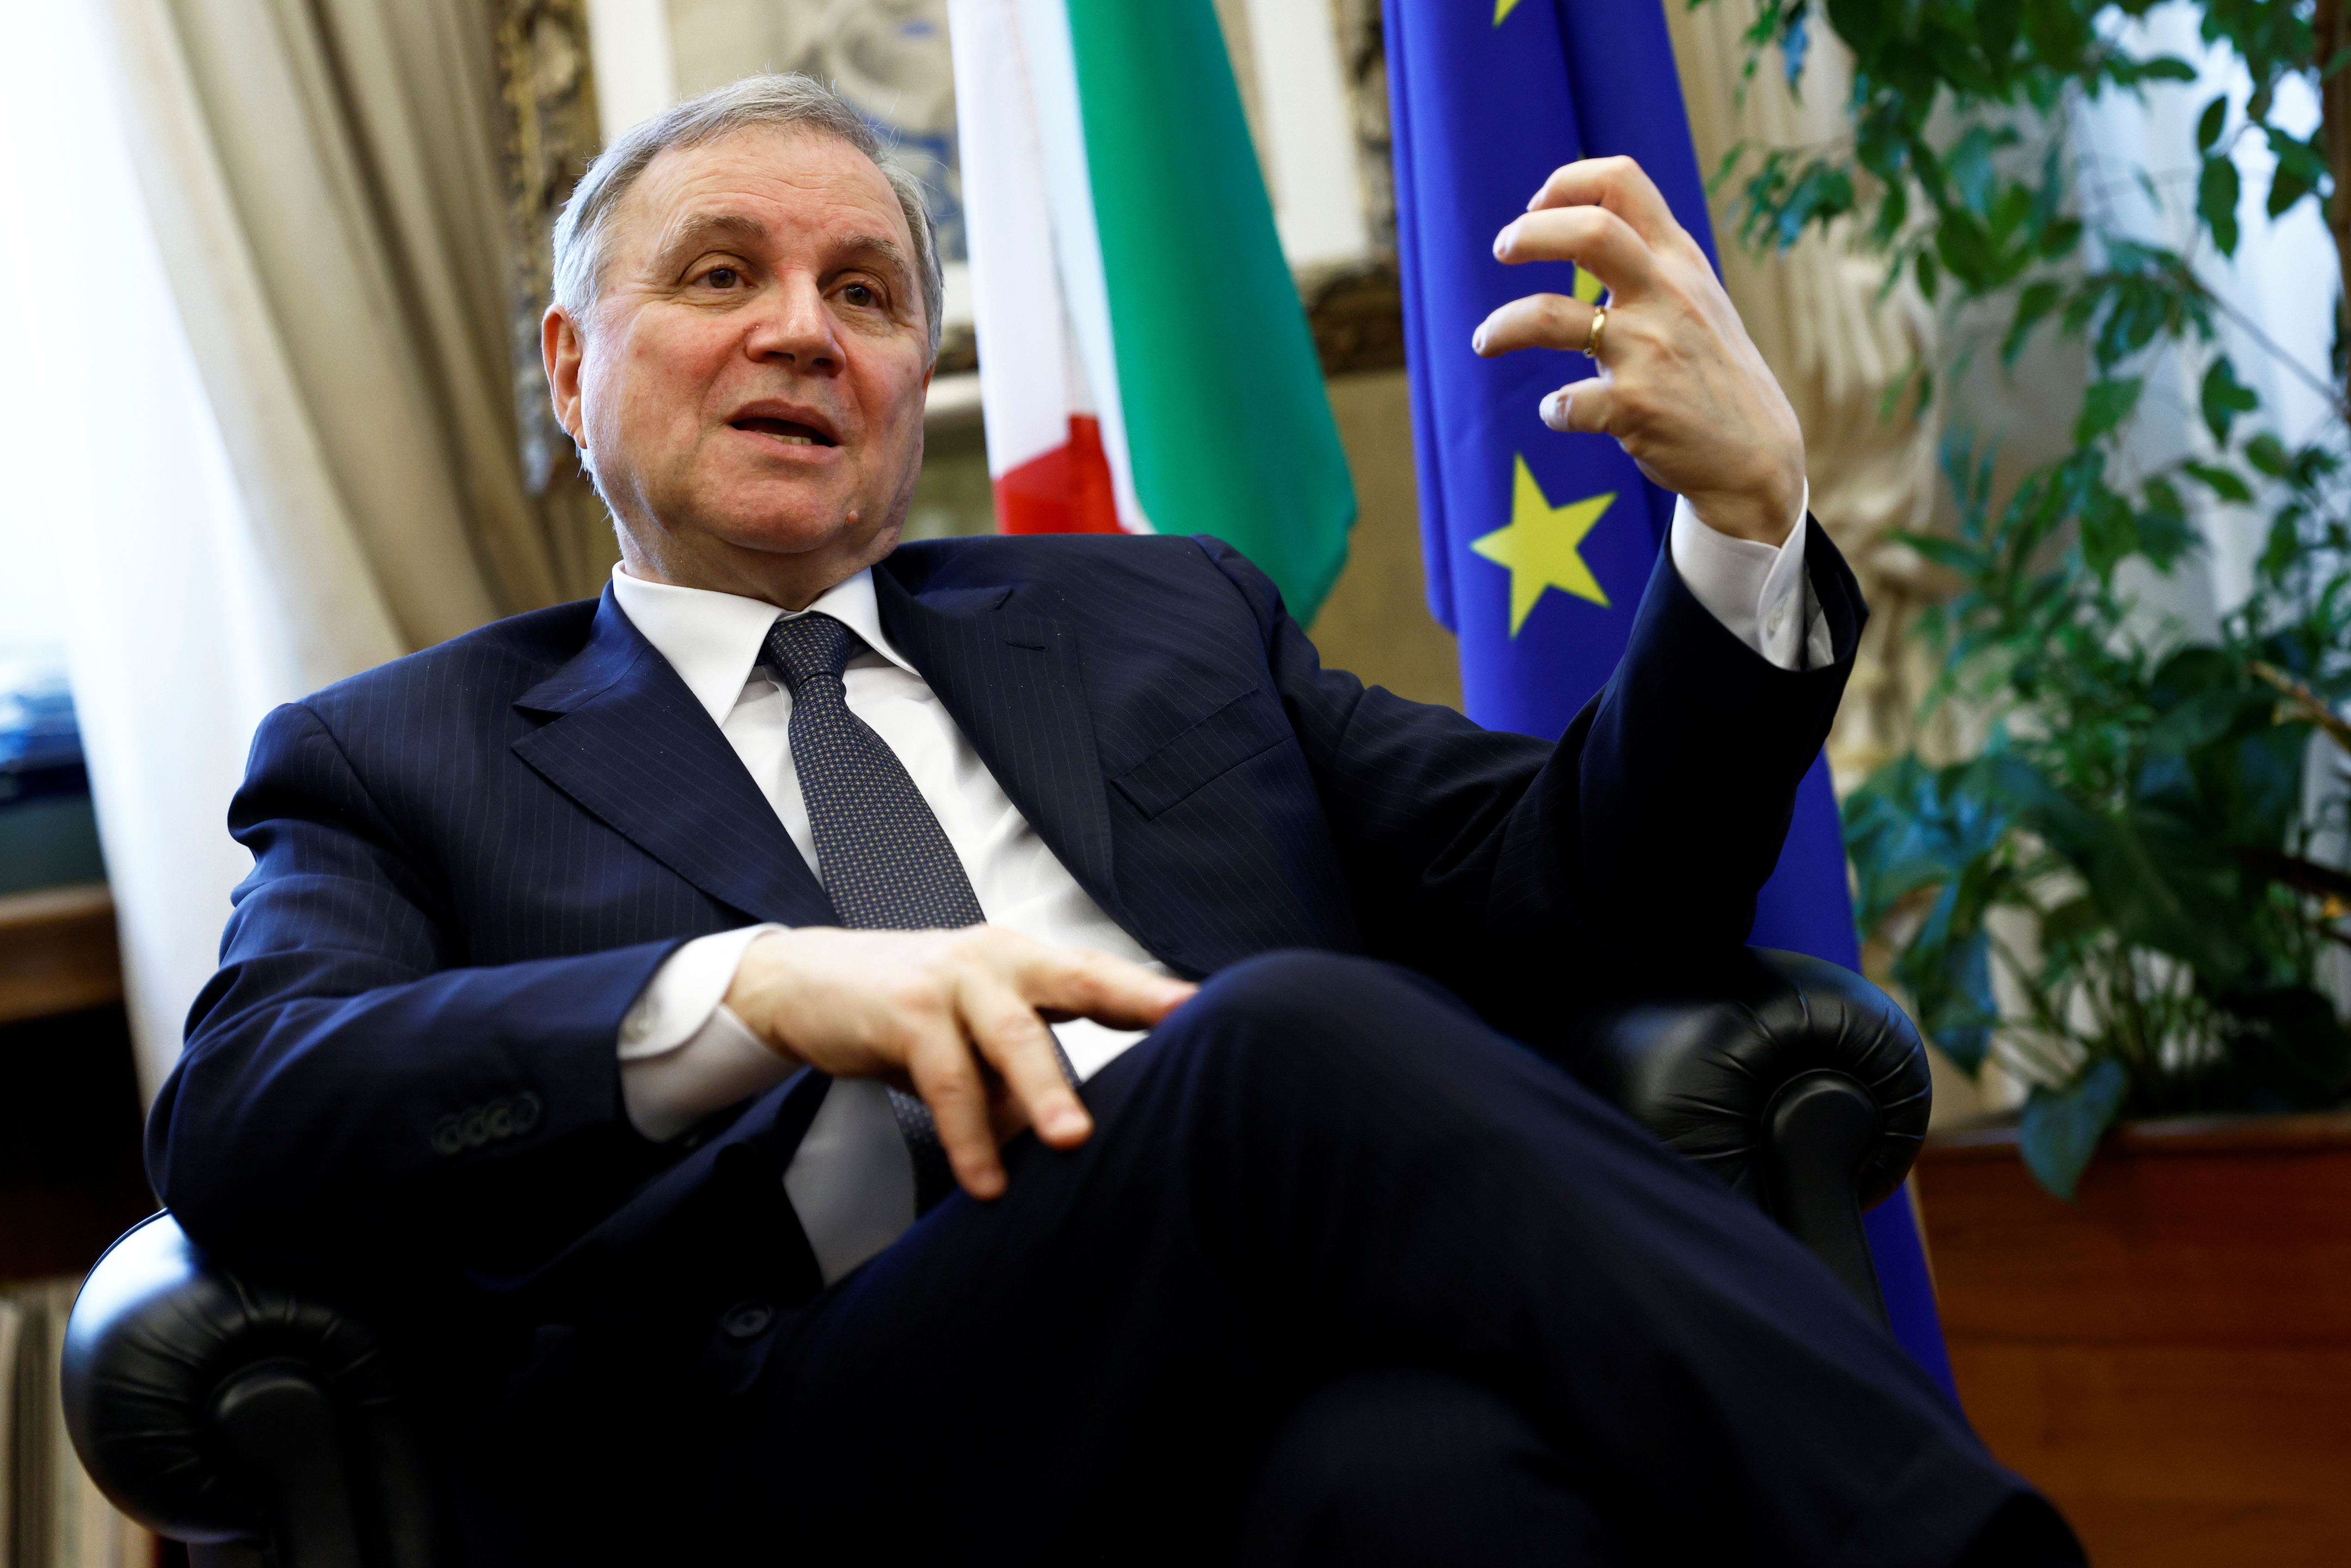 Interview with ECB's policymaker Visco in Rome